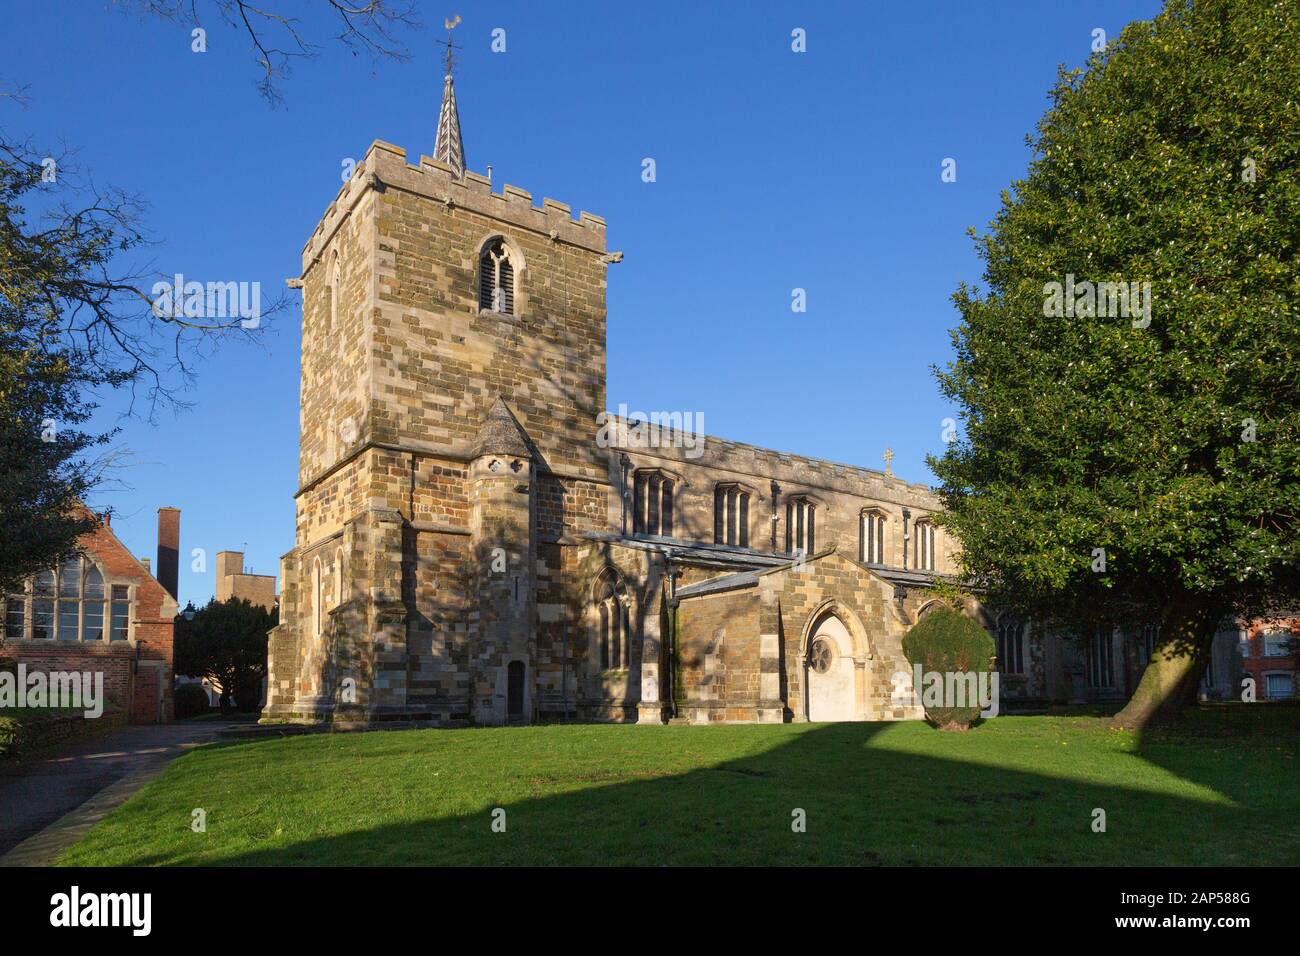 Lincolnshire church, St Mary the Virgin church in the town of Horncastle, Lincolnshire England UK Stock Photo